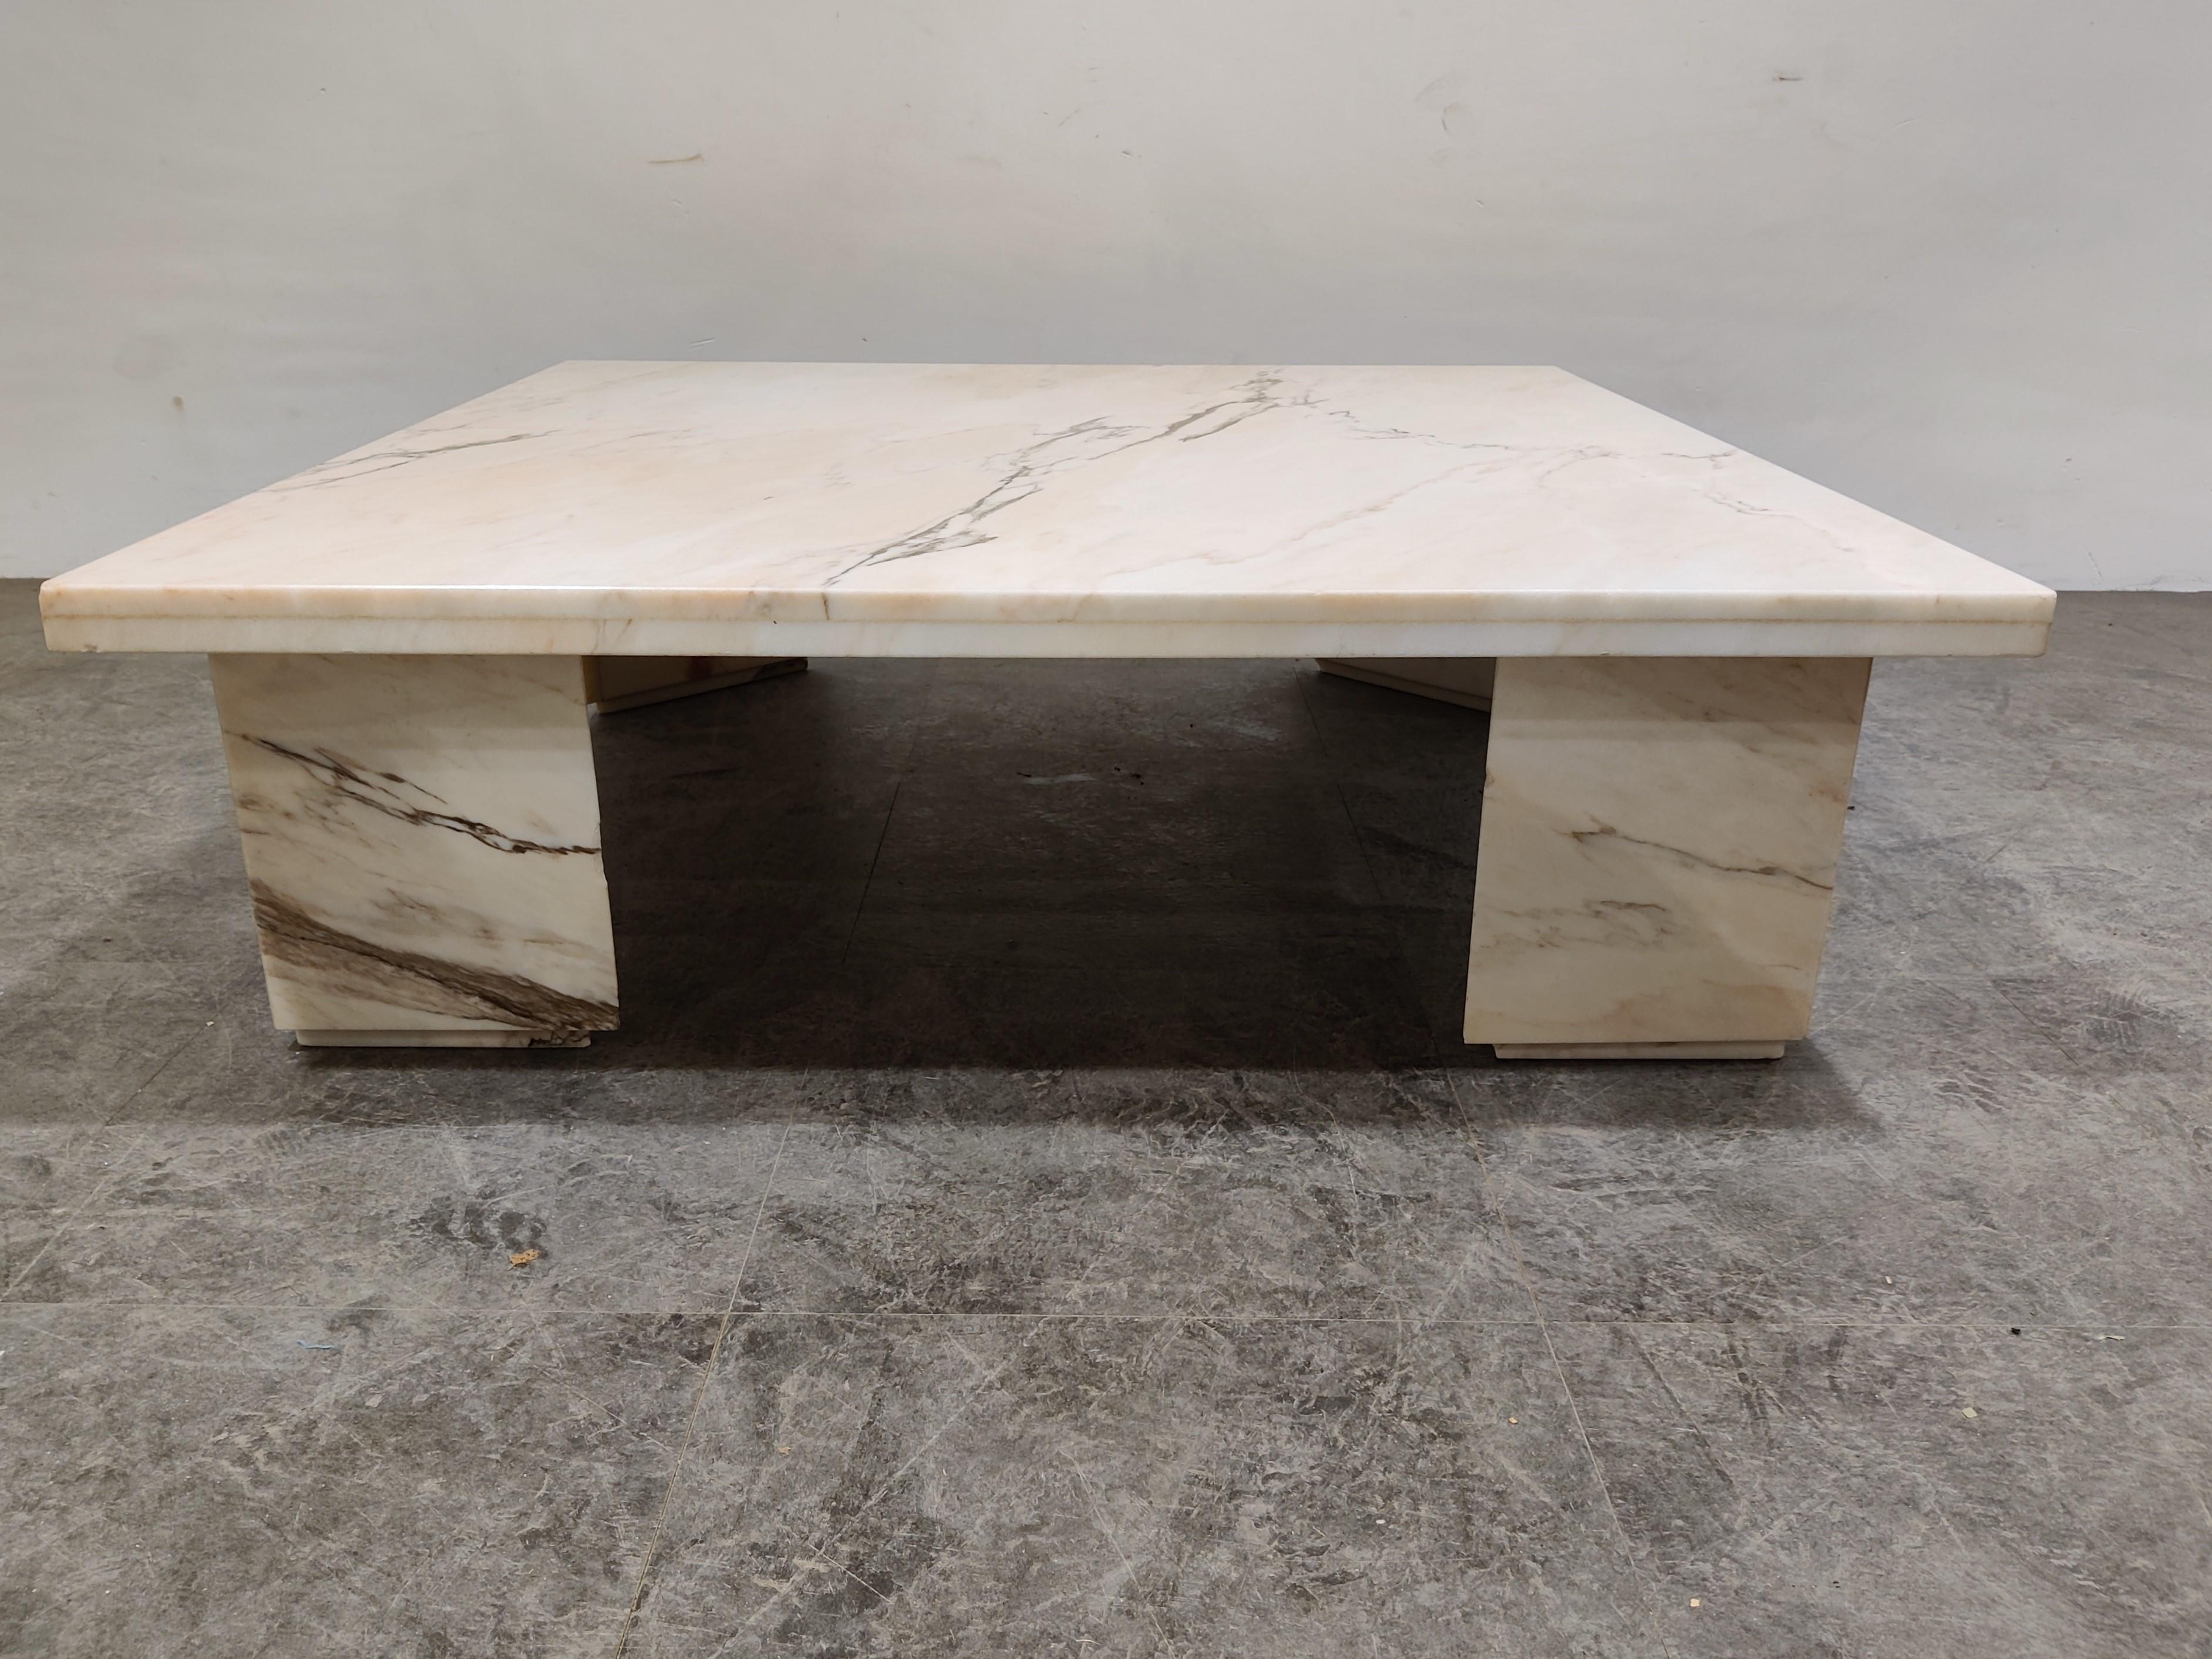 Timeless white marble coffee table with 4 triangular bases.

Beautiful vained marble.

Overall good condition, the bases have some chips here and there.

1970s, Italy 

Measures: Height 37cm/14.56